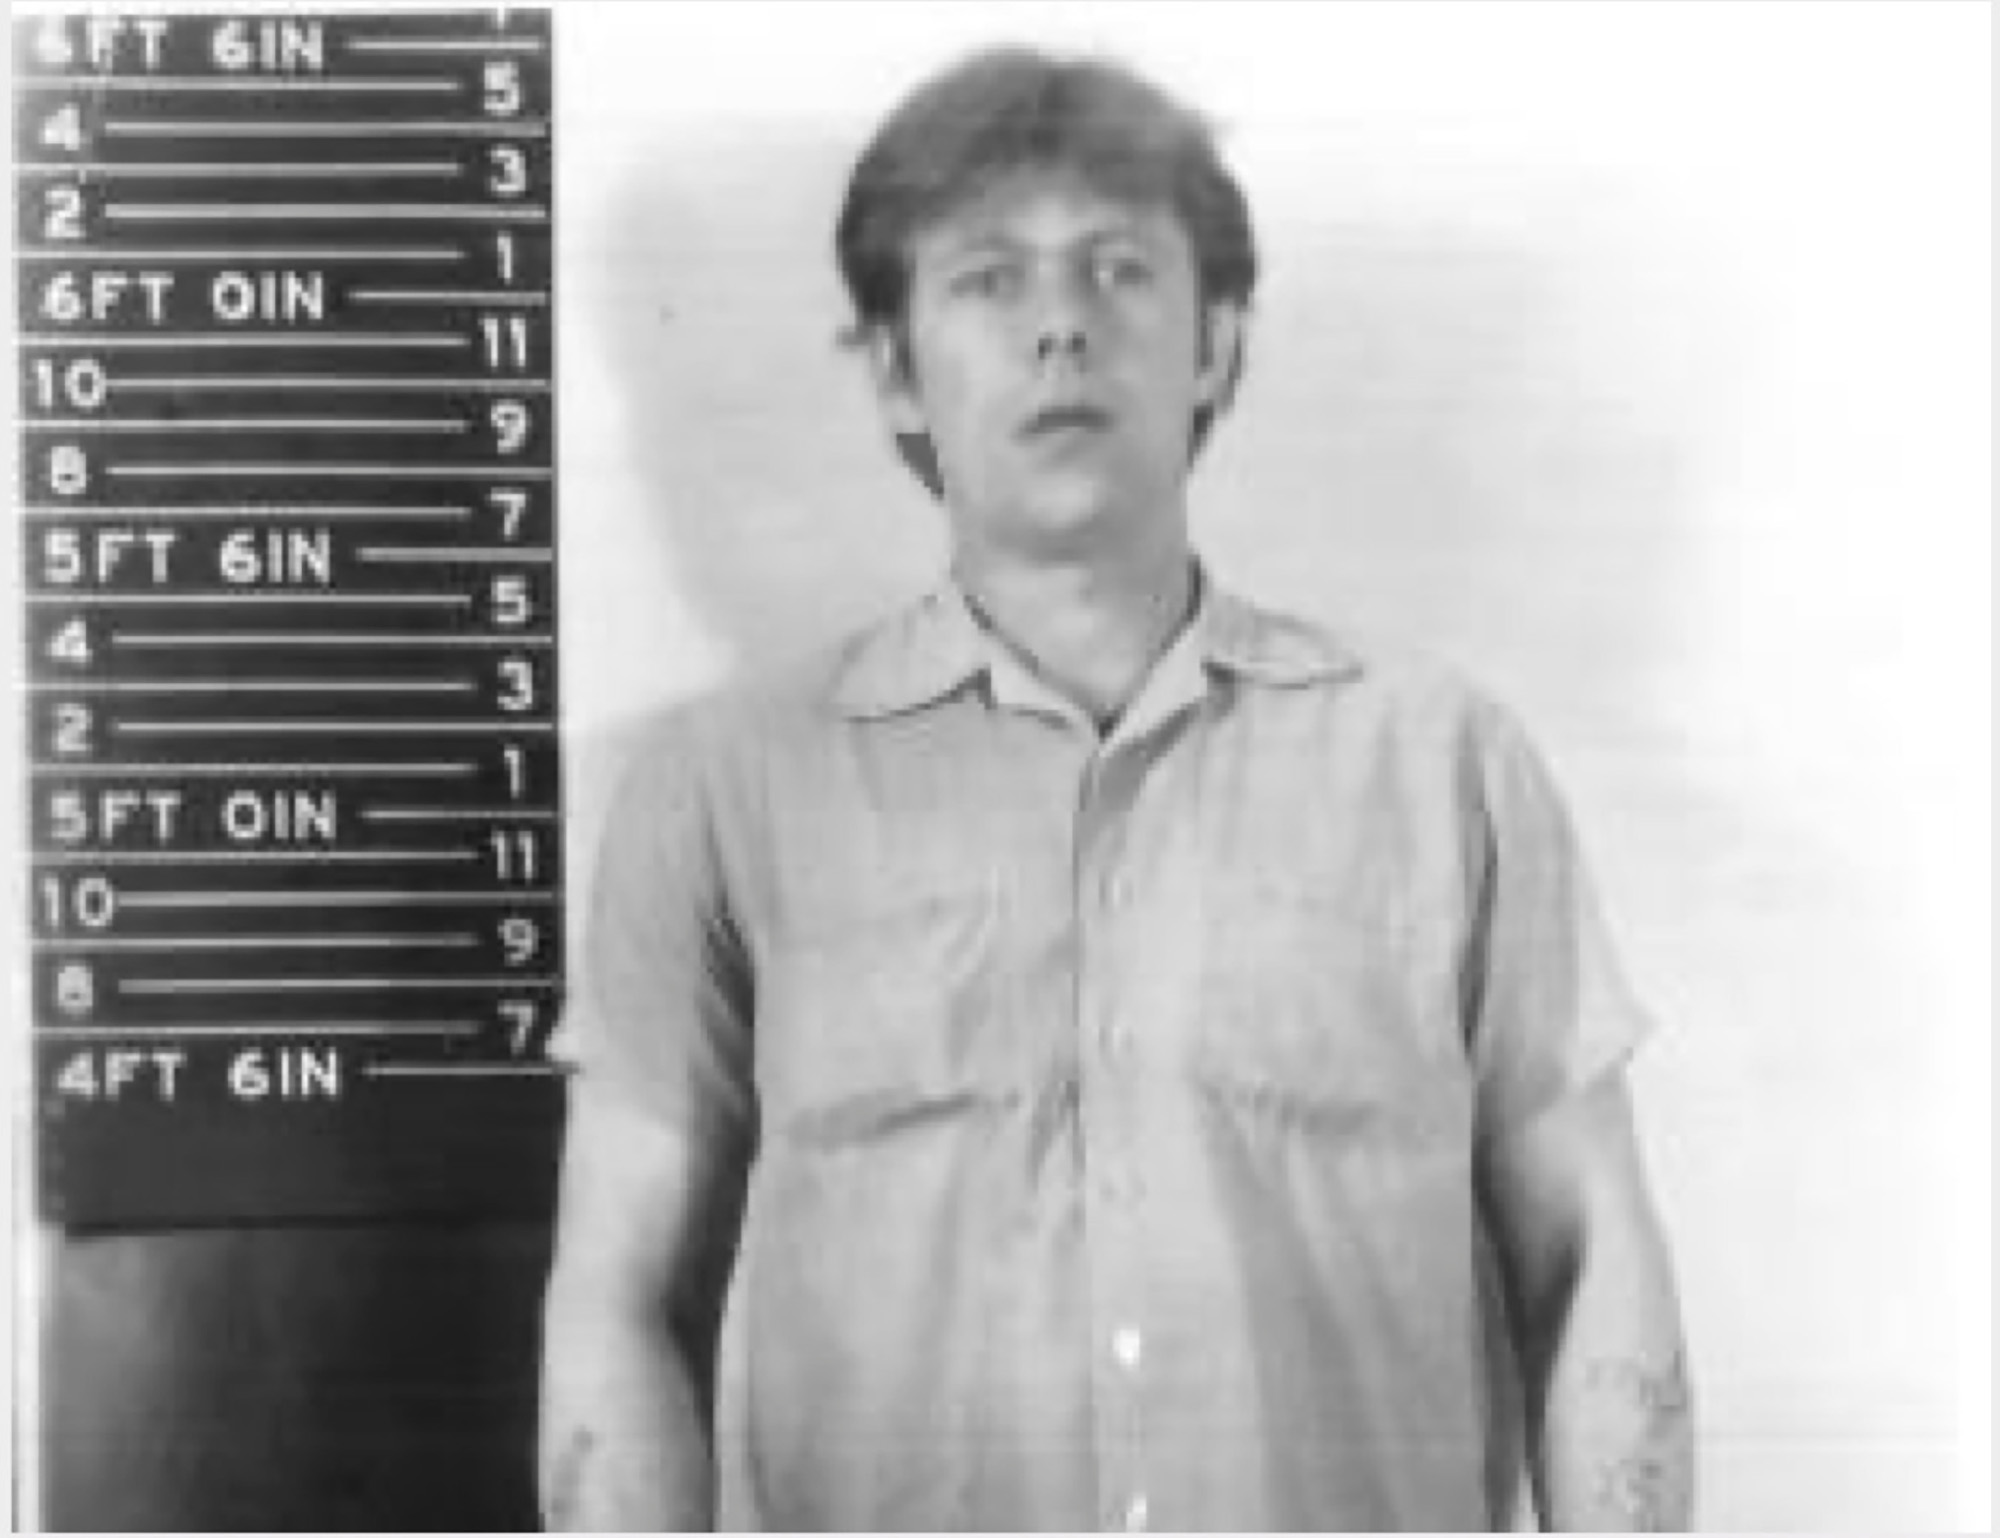 This undated booking photo provided by the Indiana State Police shows Harry Edward Greenwell, the s...